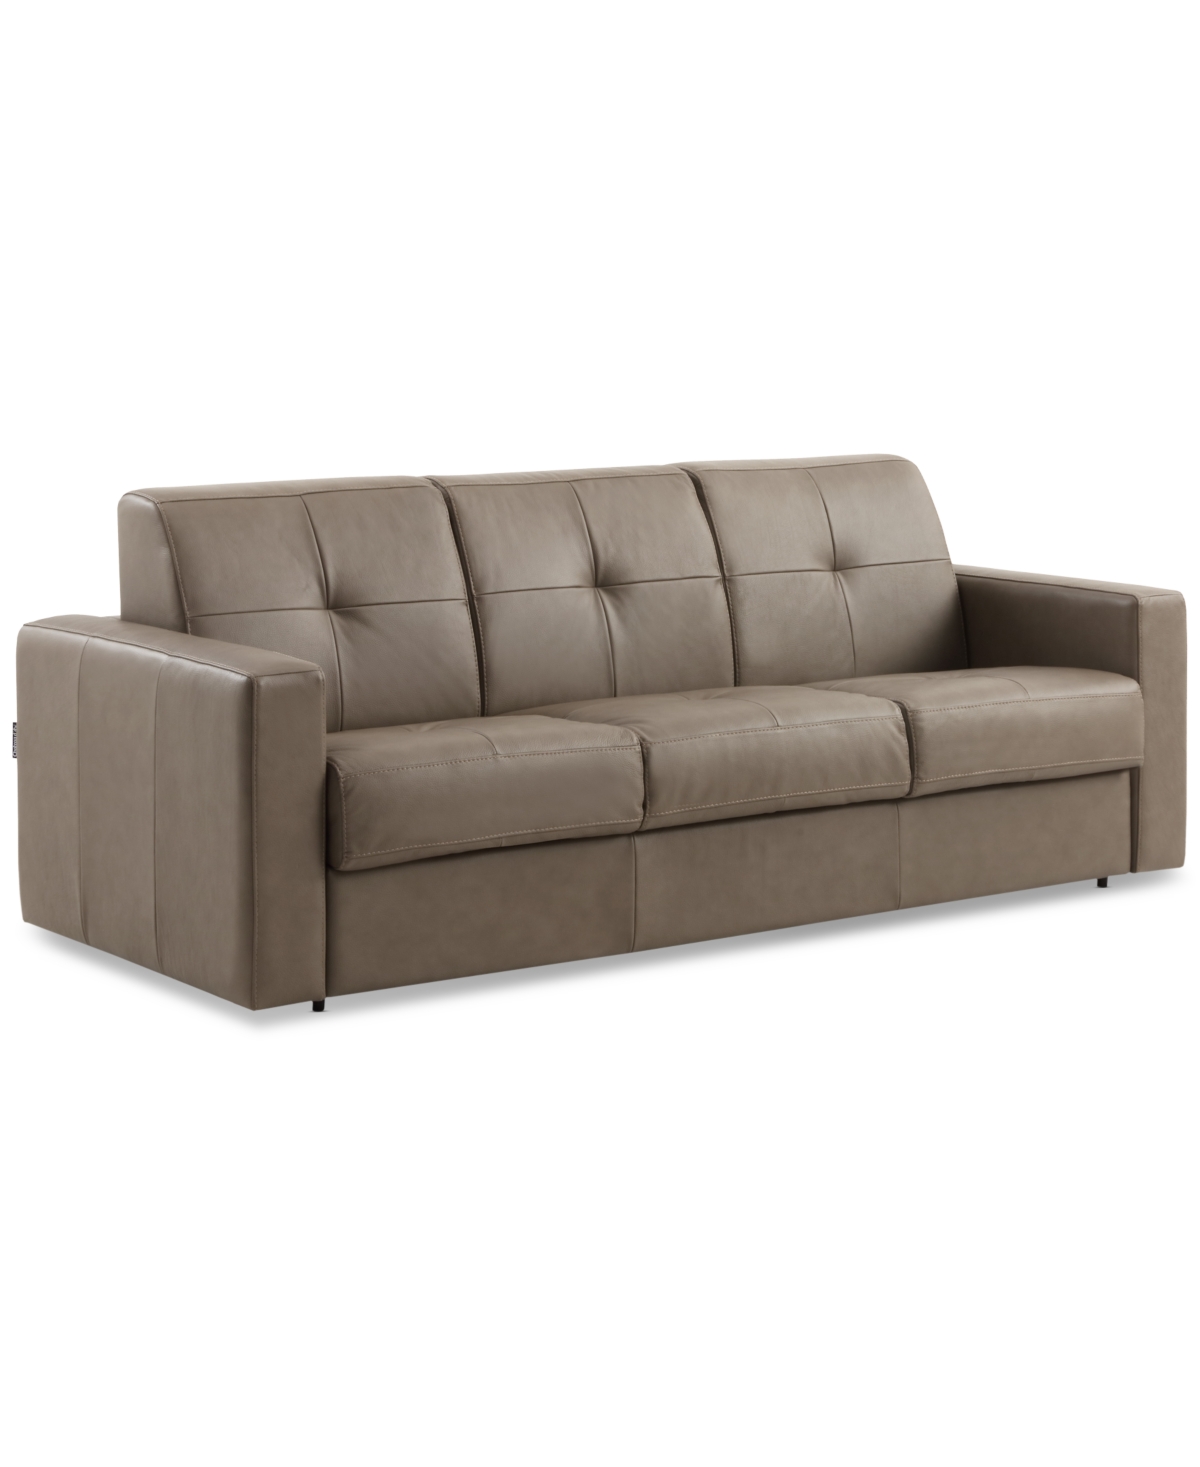 Macy's Shevrin Leather Sleeper Sofa, Created For  In Taupe